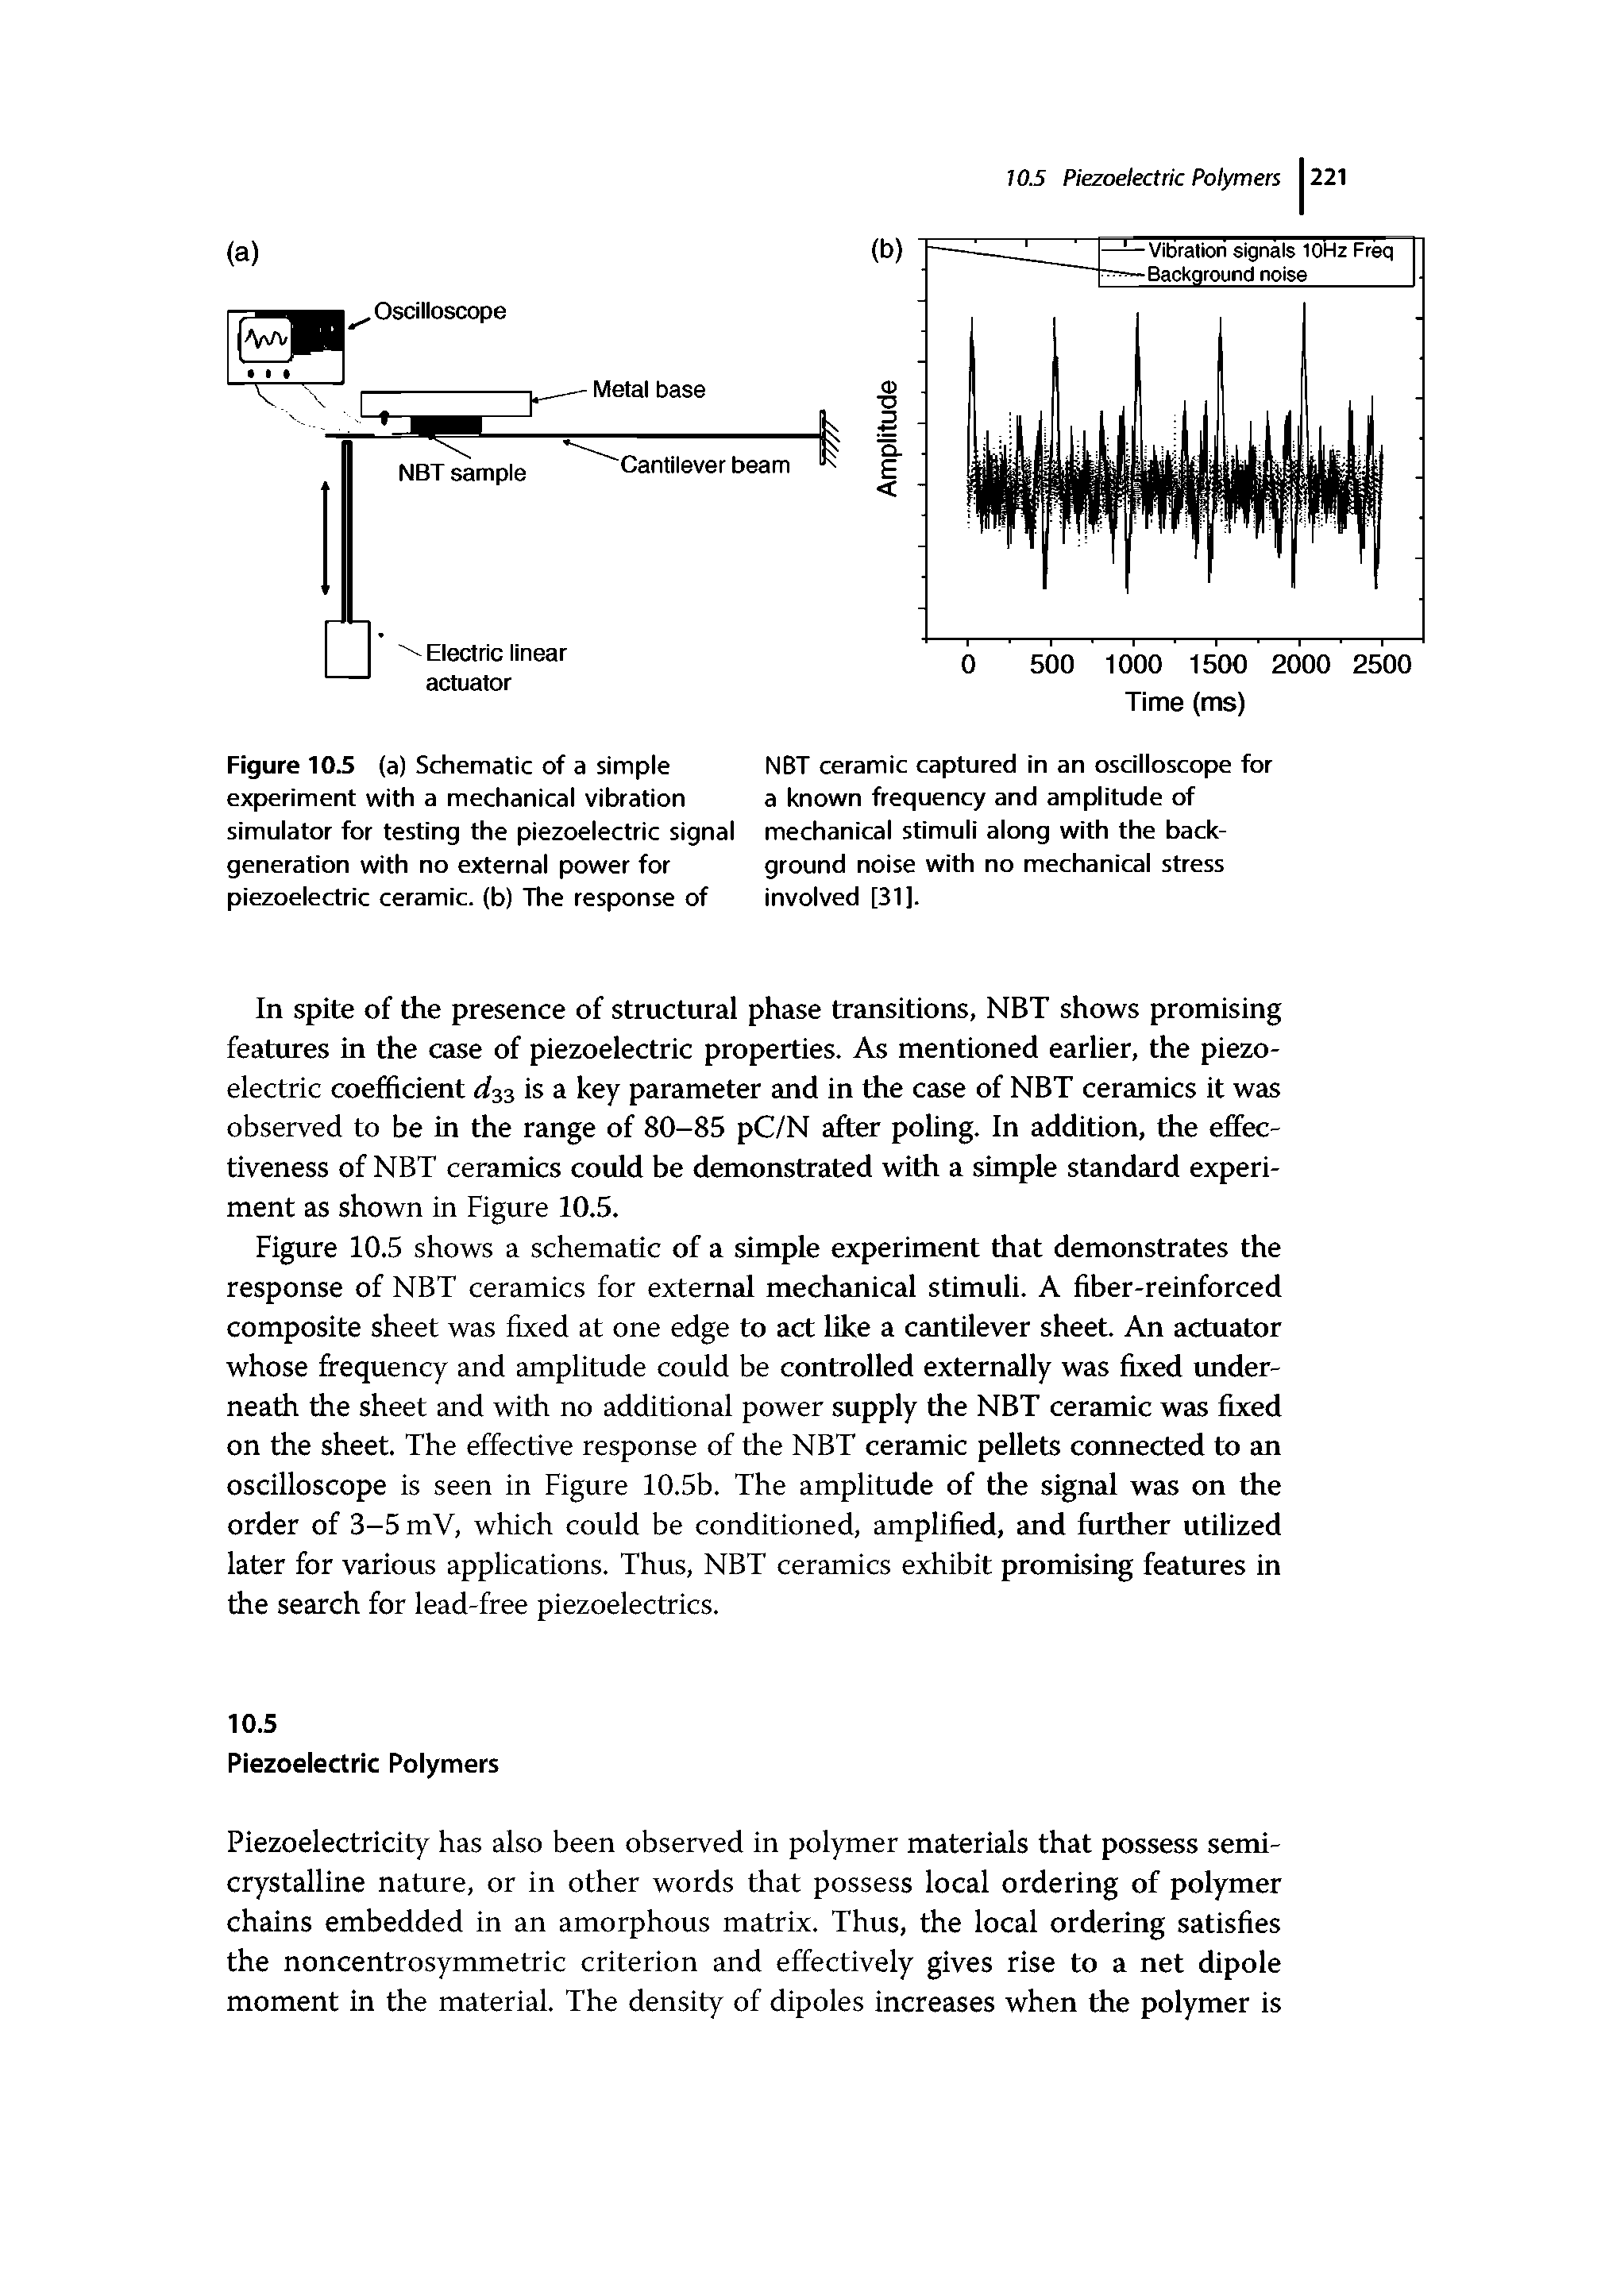 Figure 10.5 shows a schematic of a simple experiment that demonstrates the response of NBT ceramics for external mechanical stimuli. A fiber-reinforced composite sheet was fixed at one edge to act like a cantilever sheet An actuator whose frequency and amplitude could be controlled externally was fixed imder-neath the sheet and with no additional power supply the NBT ceramic was fixed on the sheet. The effective response of the NBT ceramic pellets connected to an oscilloscope is seen in Figure 10.5b. The amplitude of the signal was on the order of 3-5 mV, which could be conditioned, amplified, and further utilized later for various apphcations. Thus, NBT ceramics exhibit promising features in the search for lead-free piezoelectrics.